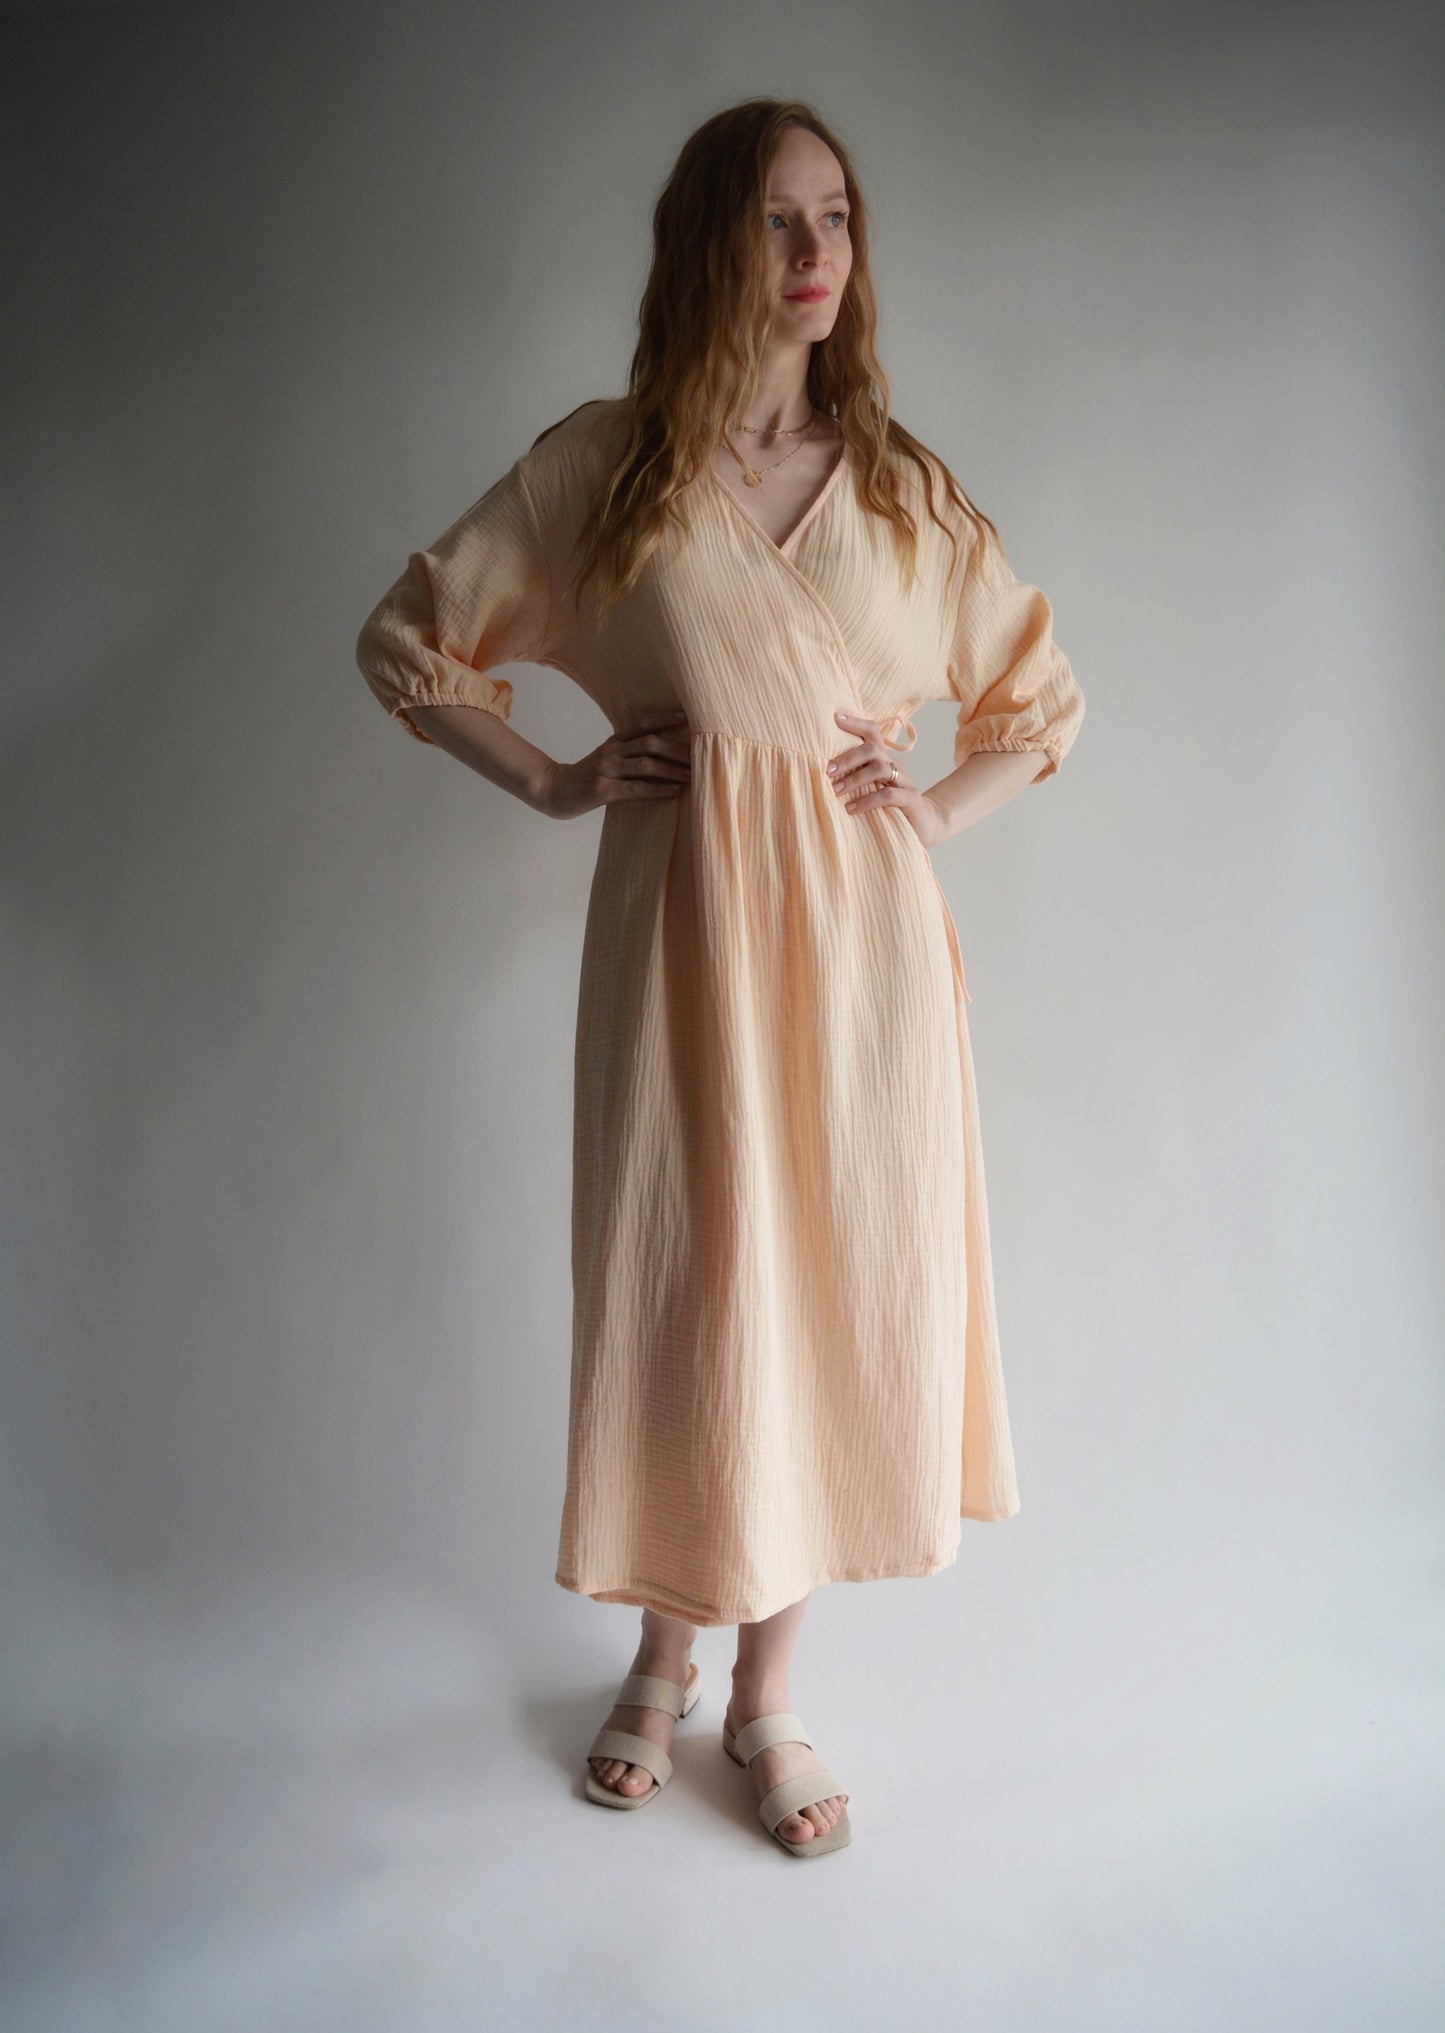 Dress in Soft Coral